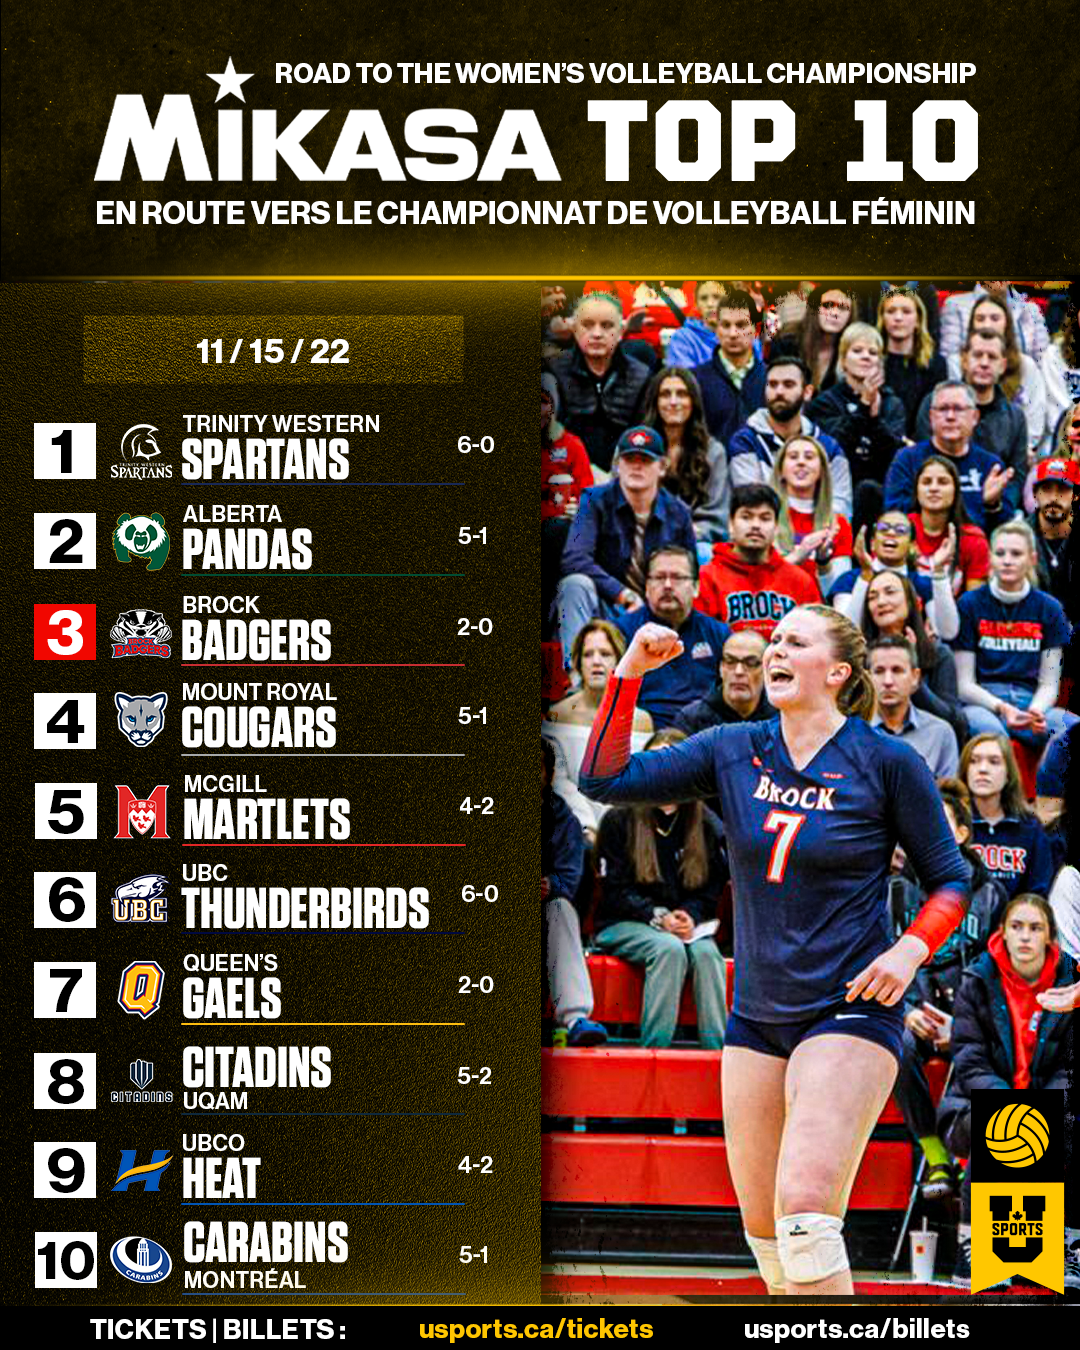 TOP_10_WVB_111522.png (2.29 MB)